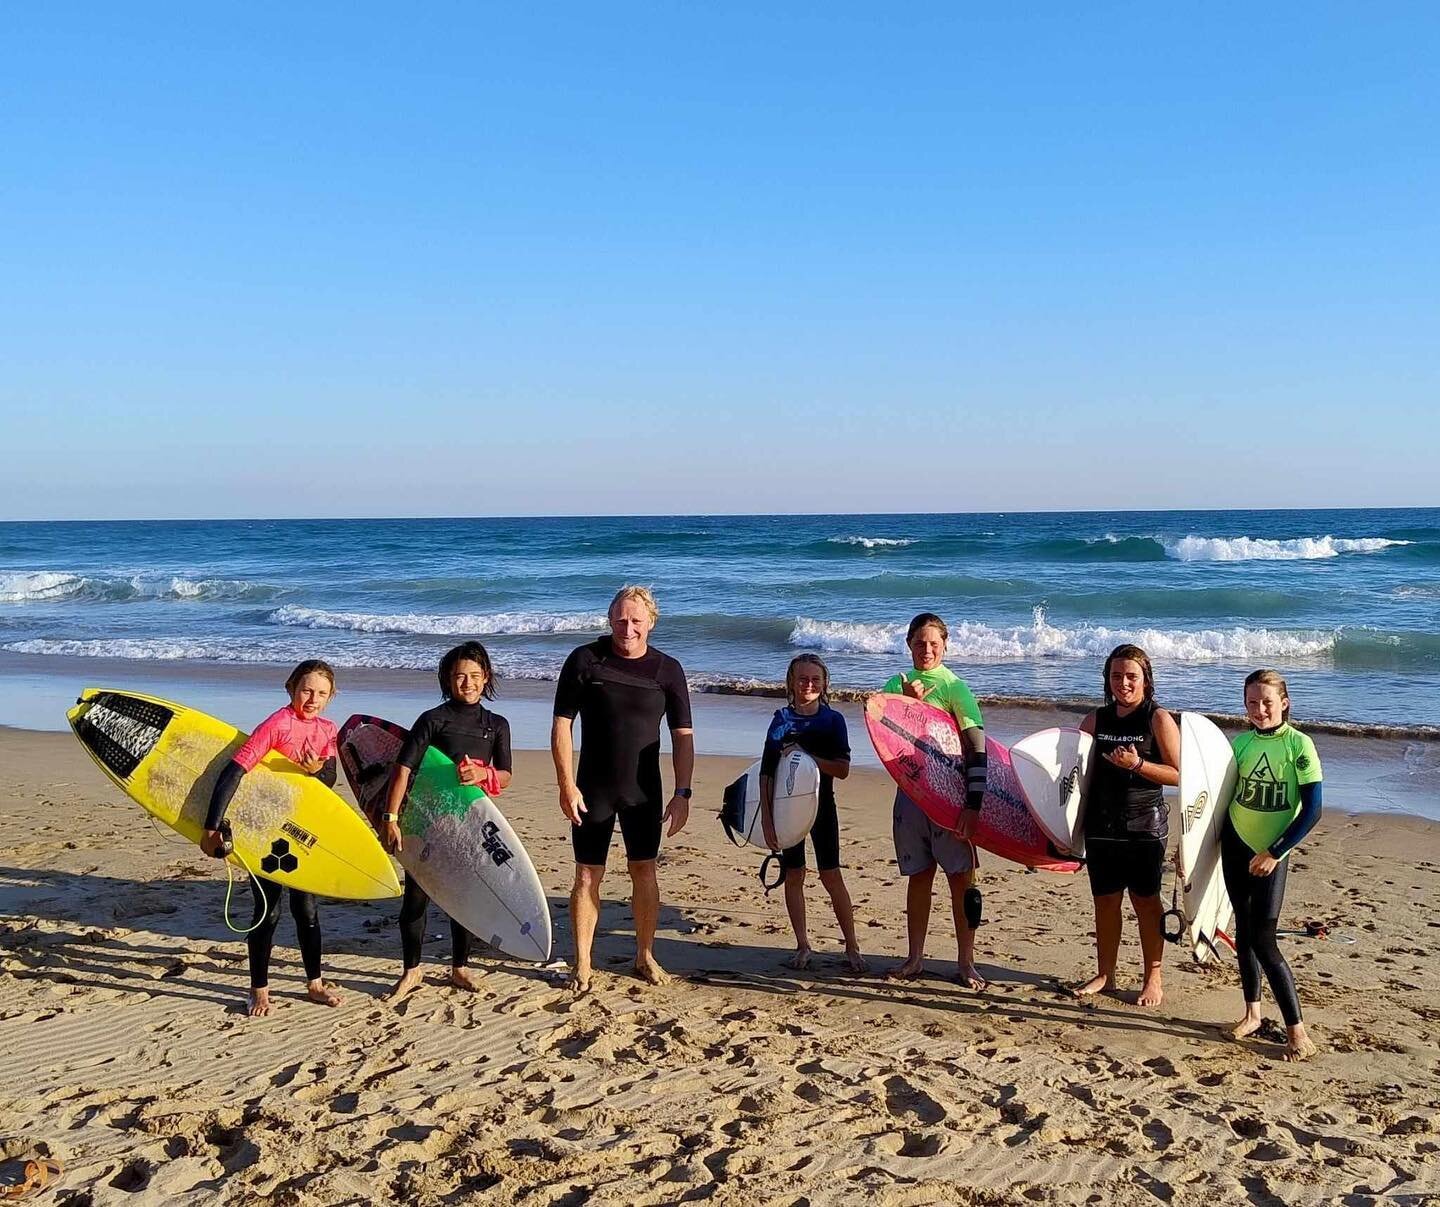 Tonight concludes our epic term of surf training for our lucky groms, state aged kids and women, run by the legend Fordy! Thanks Fordy for passing on your knowledge, encouragement and love for all things surfing to us all. There have been so many lau